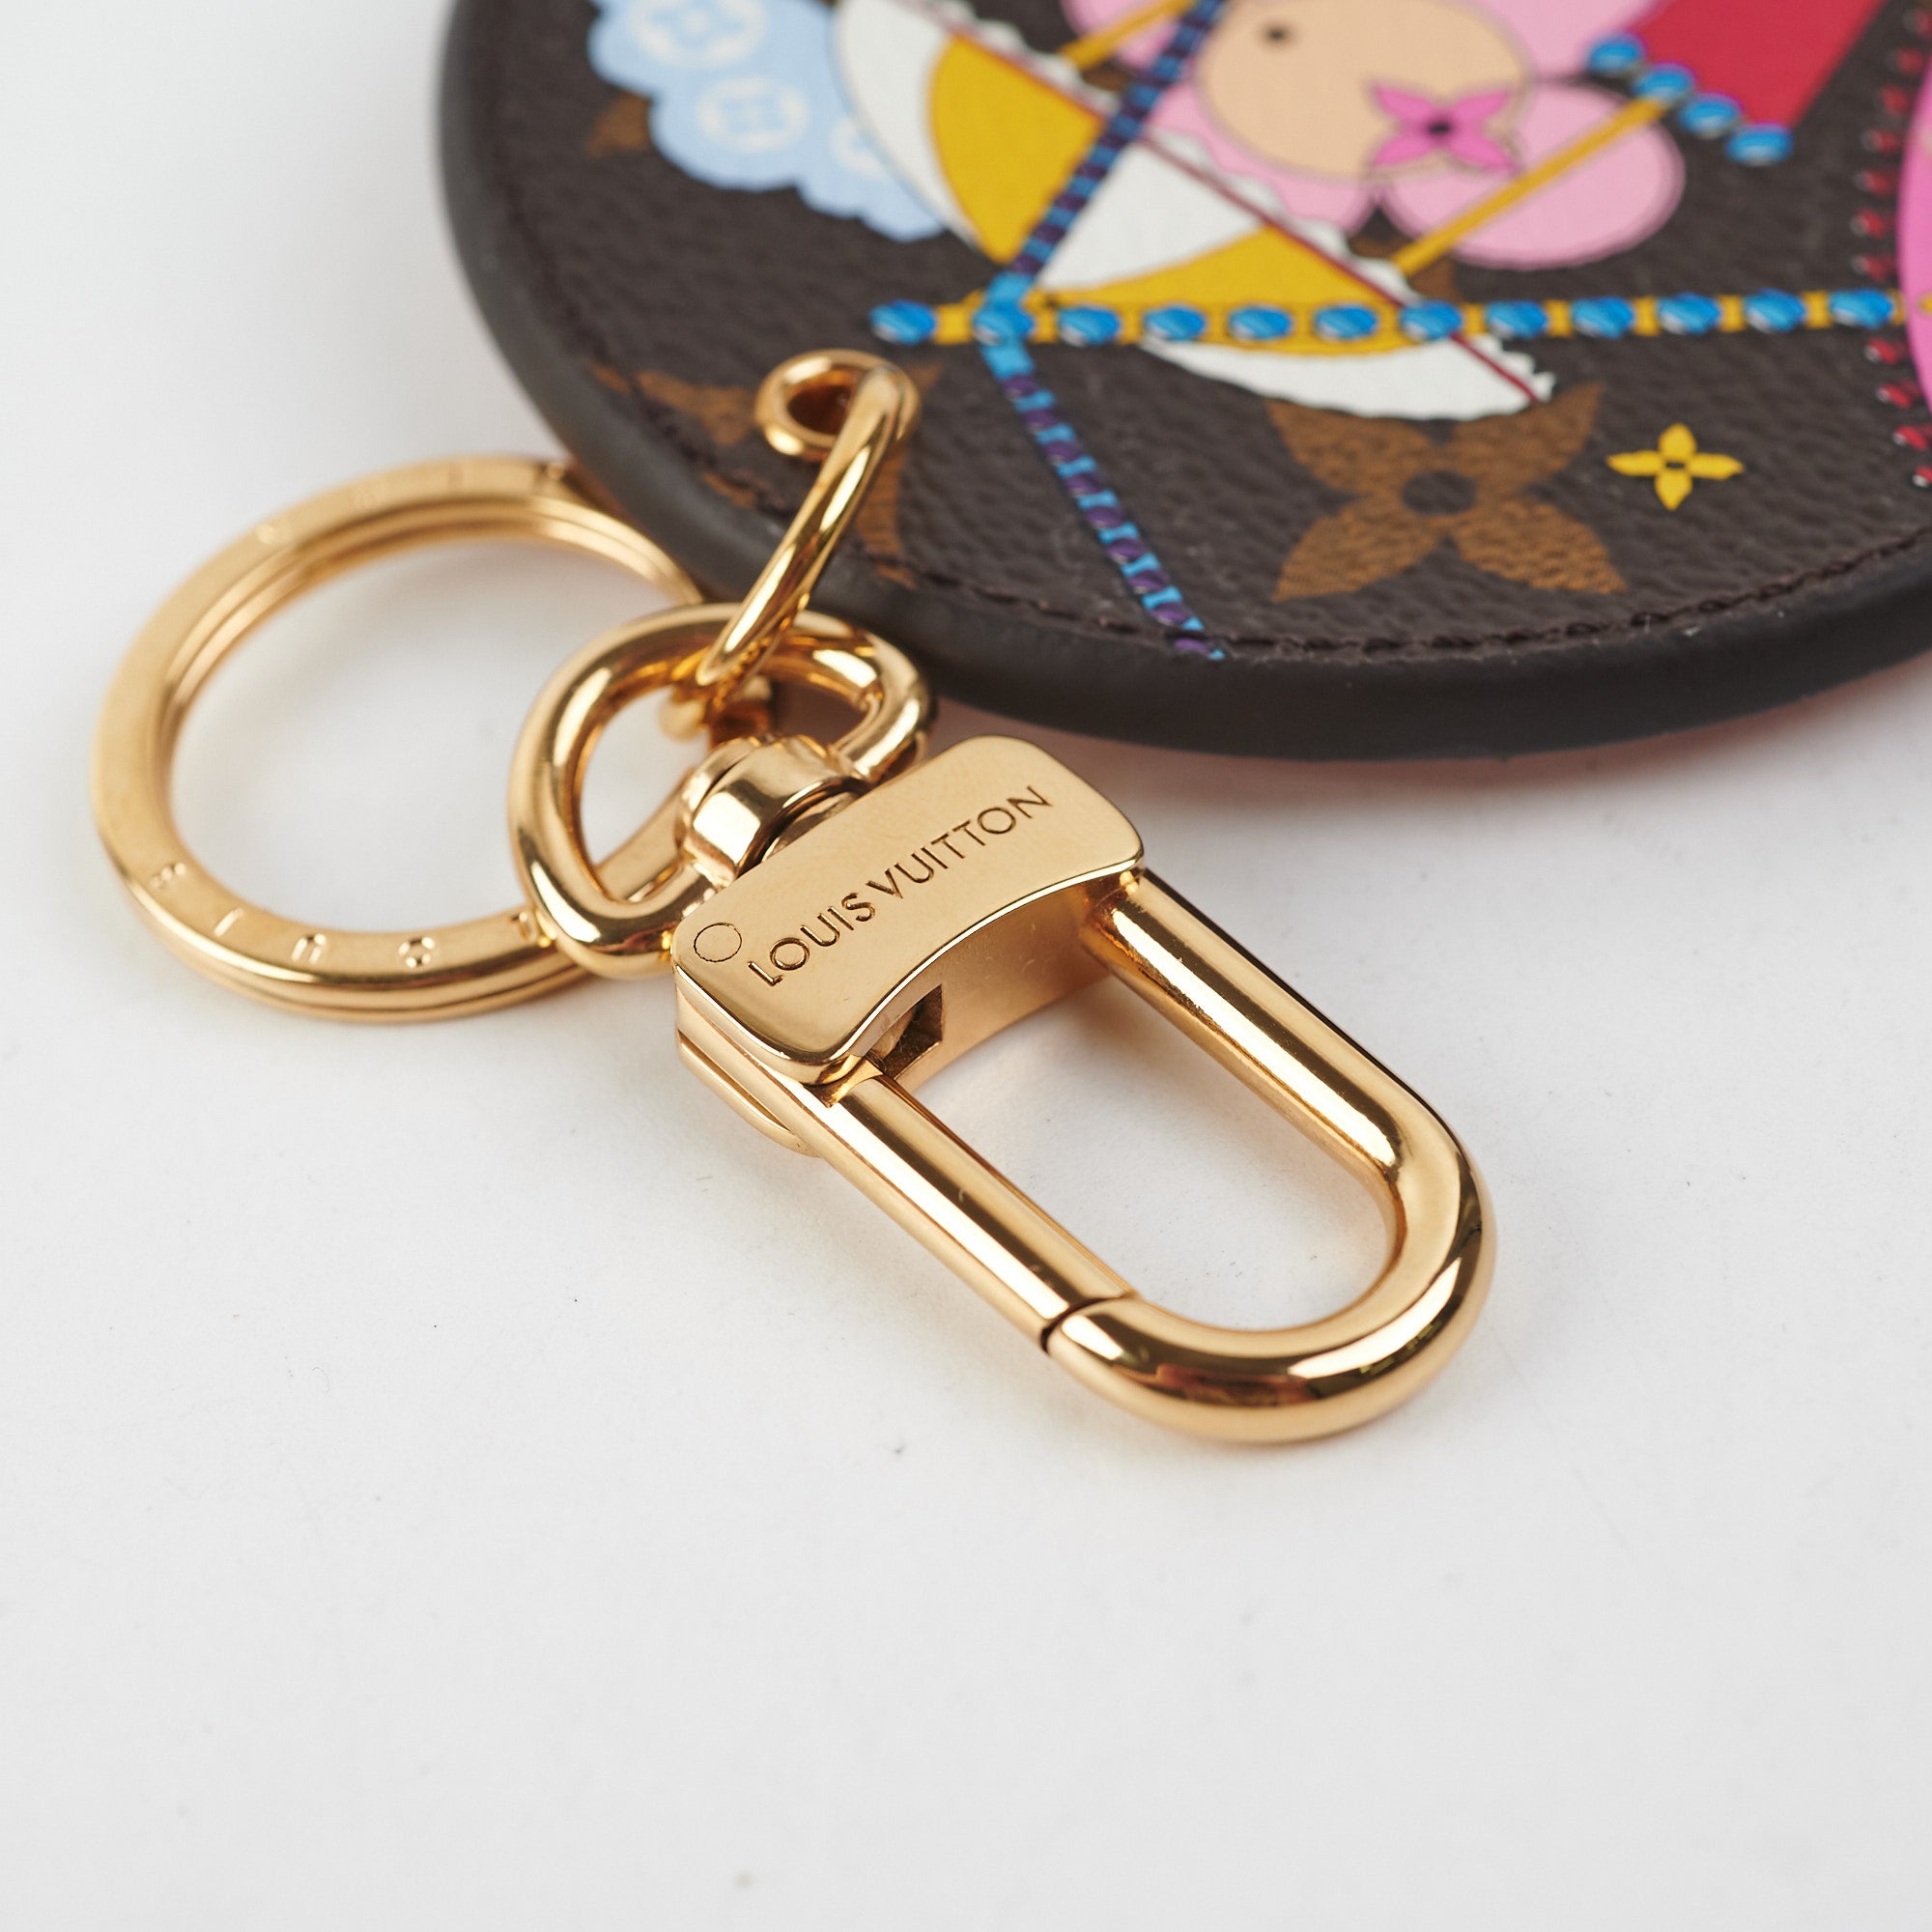 Vivienne Fun Xmas Bag Charm And Key Holder S00 - Accessories